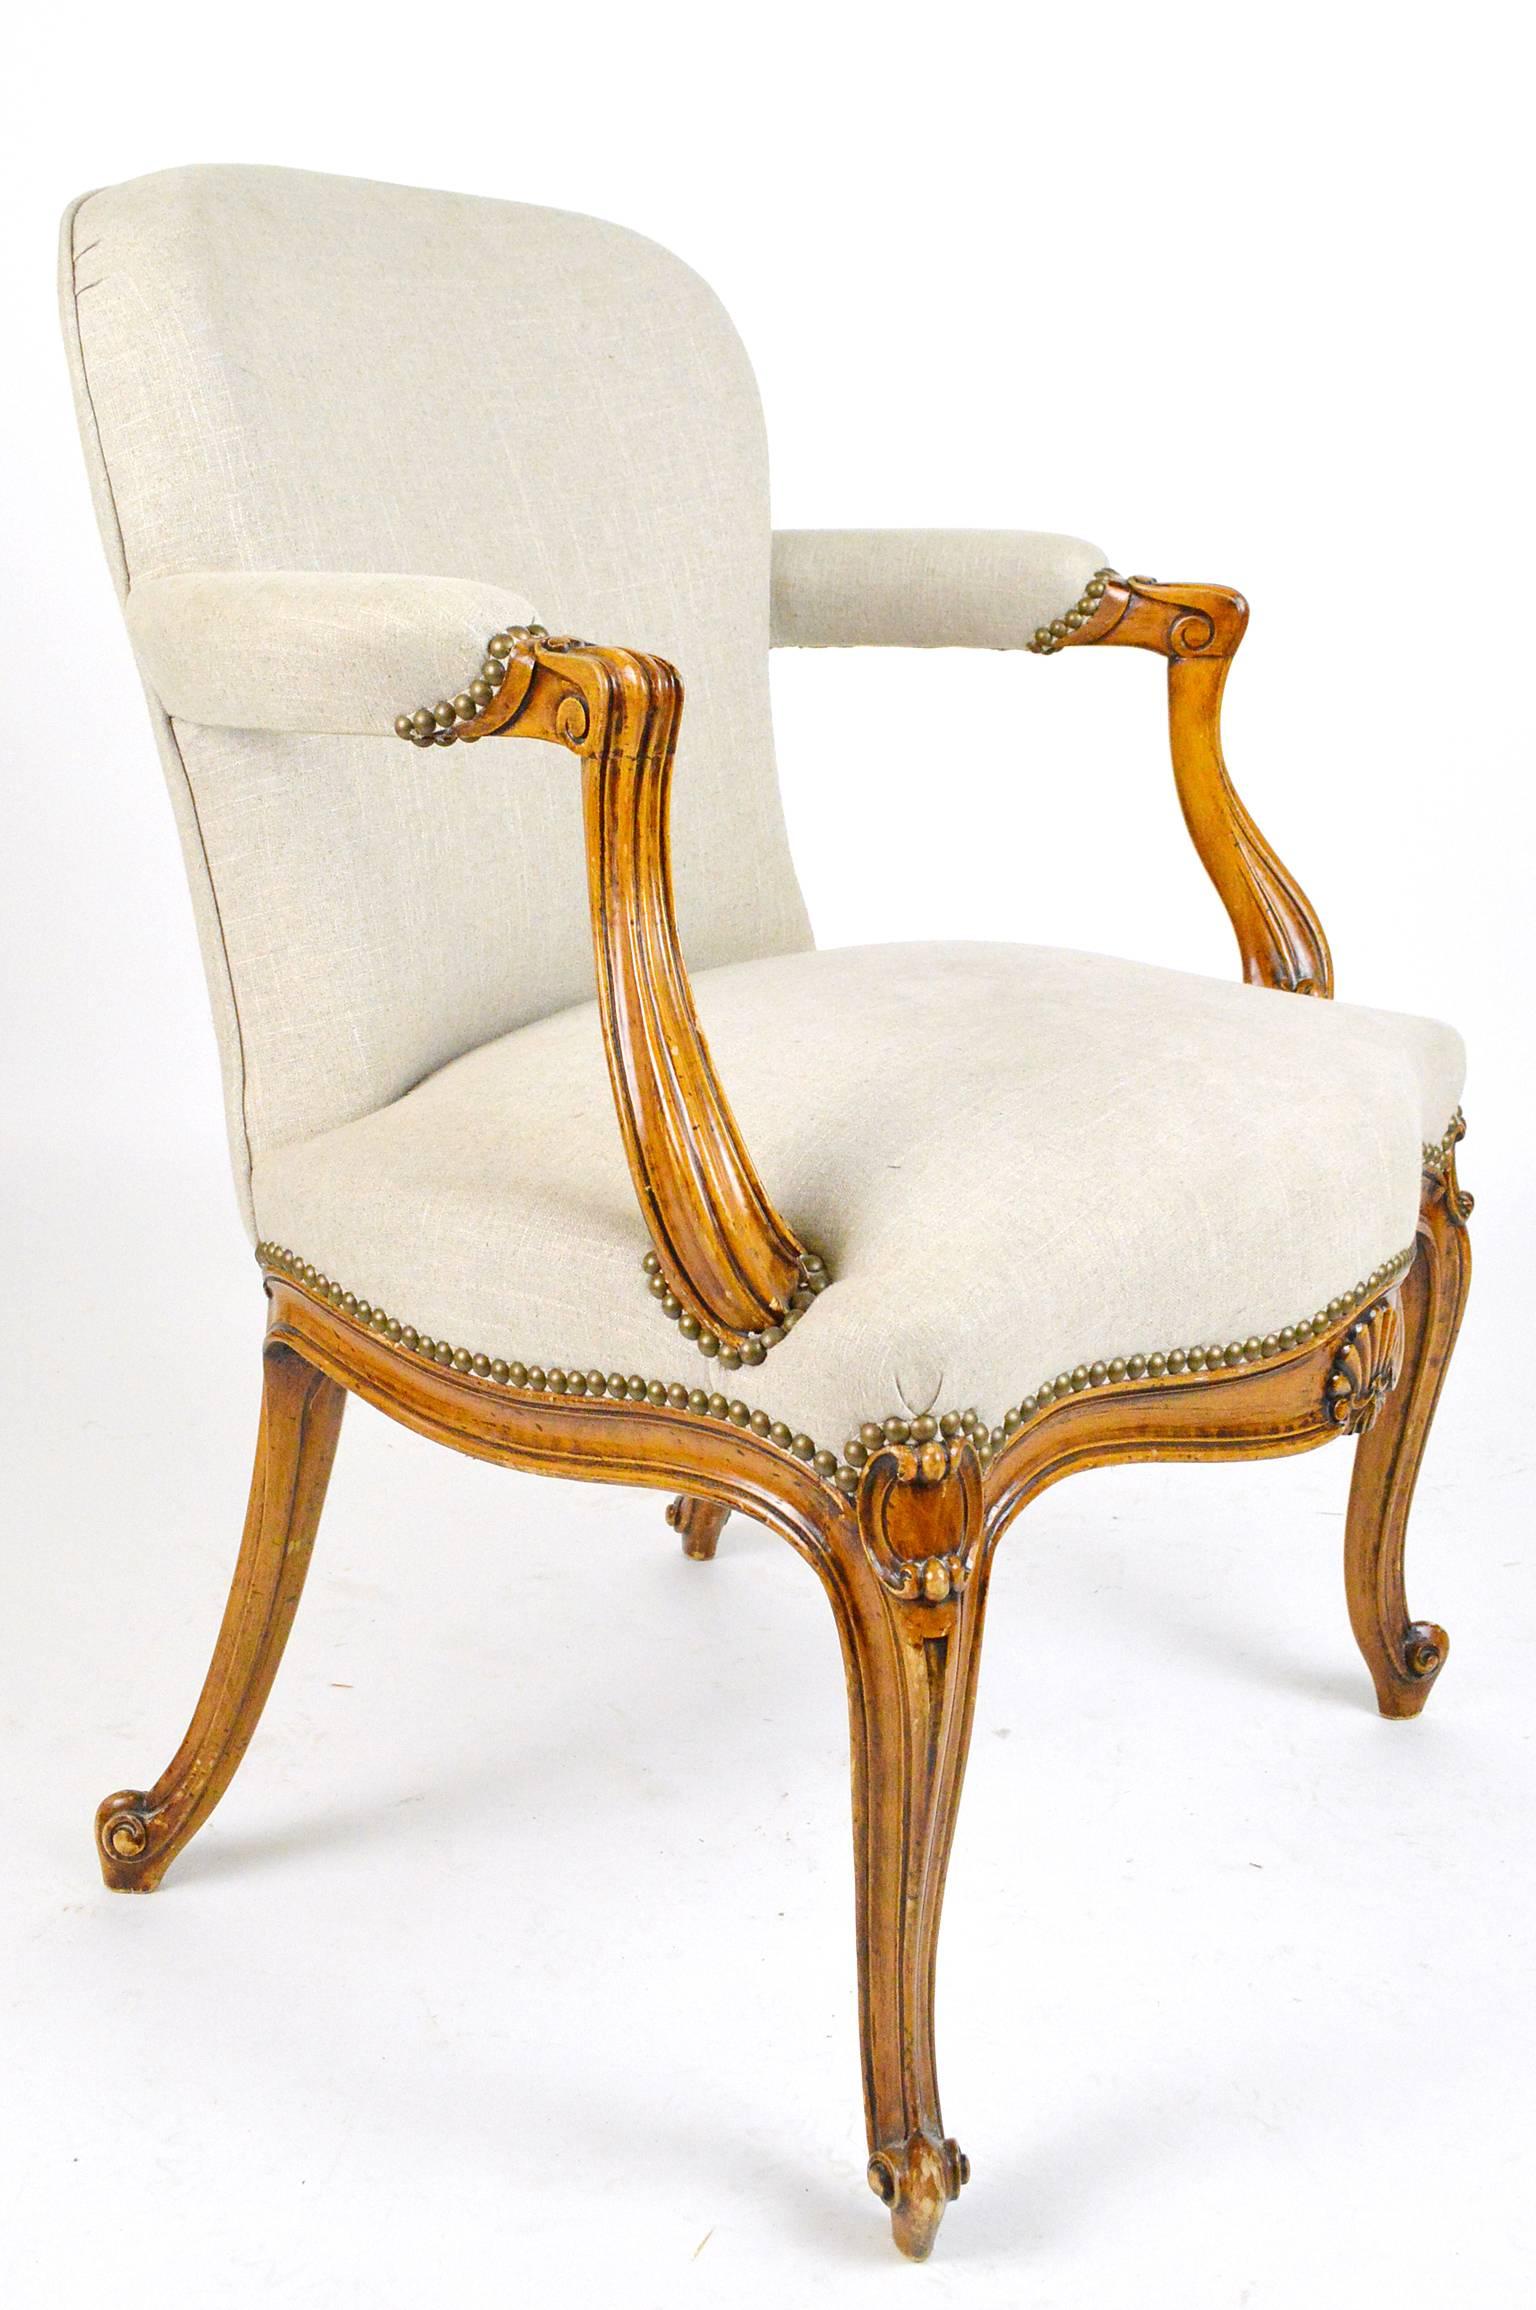 19th Century French Regency Style Carved Open Armchair For Sale 4